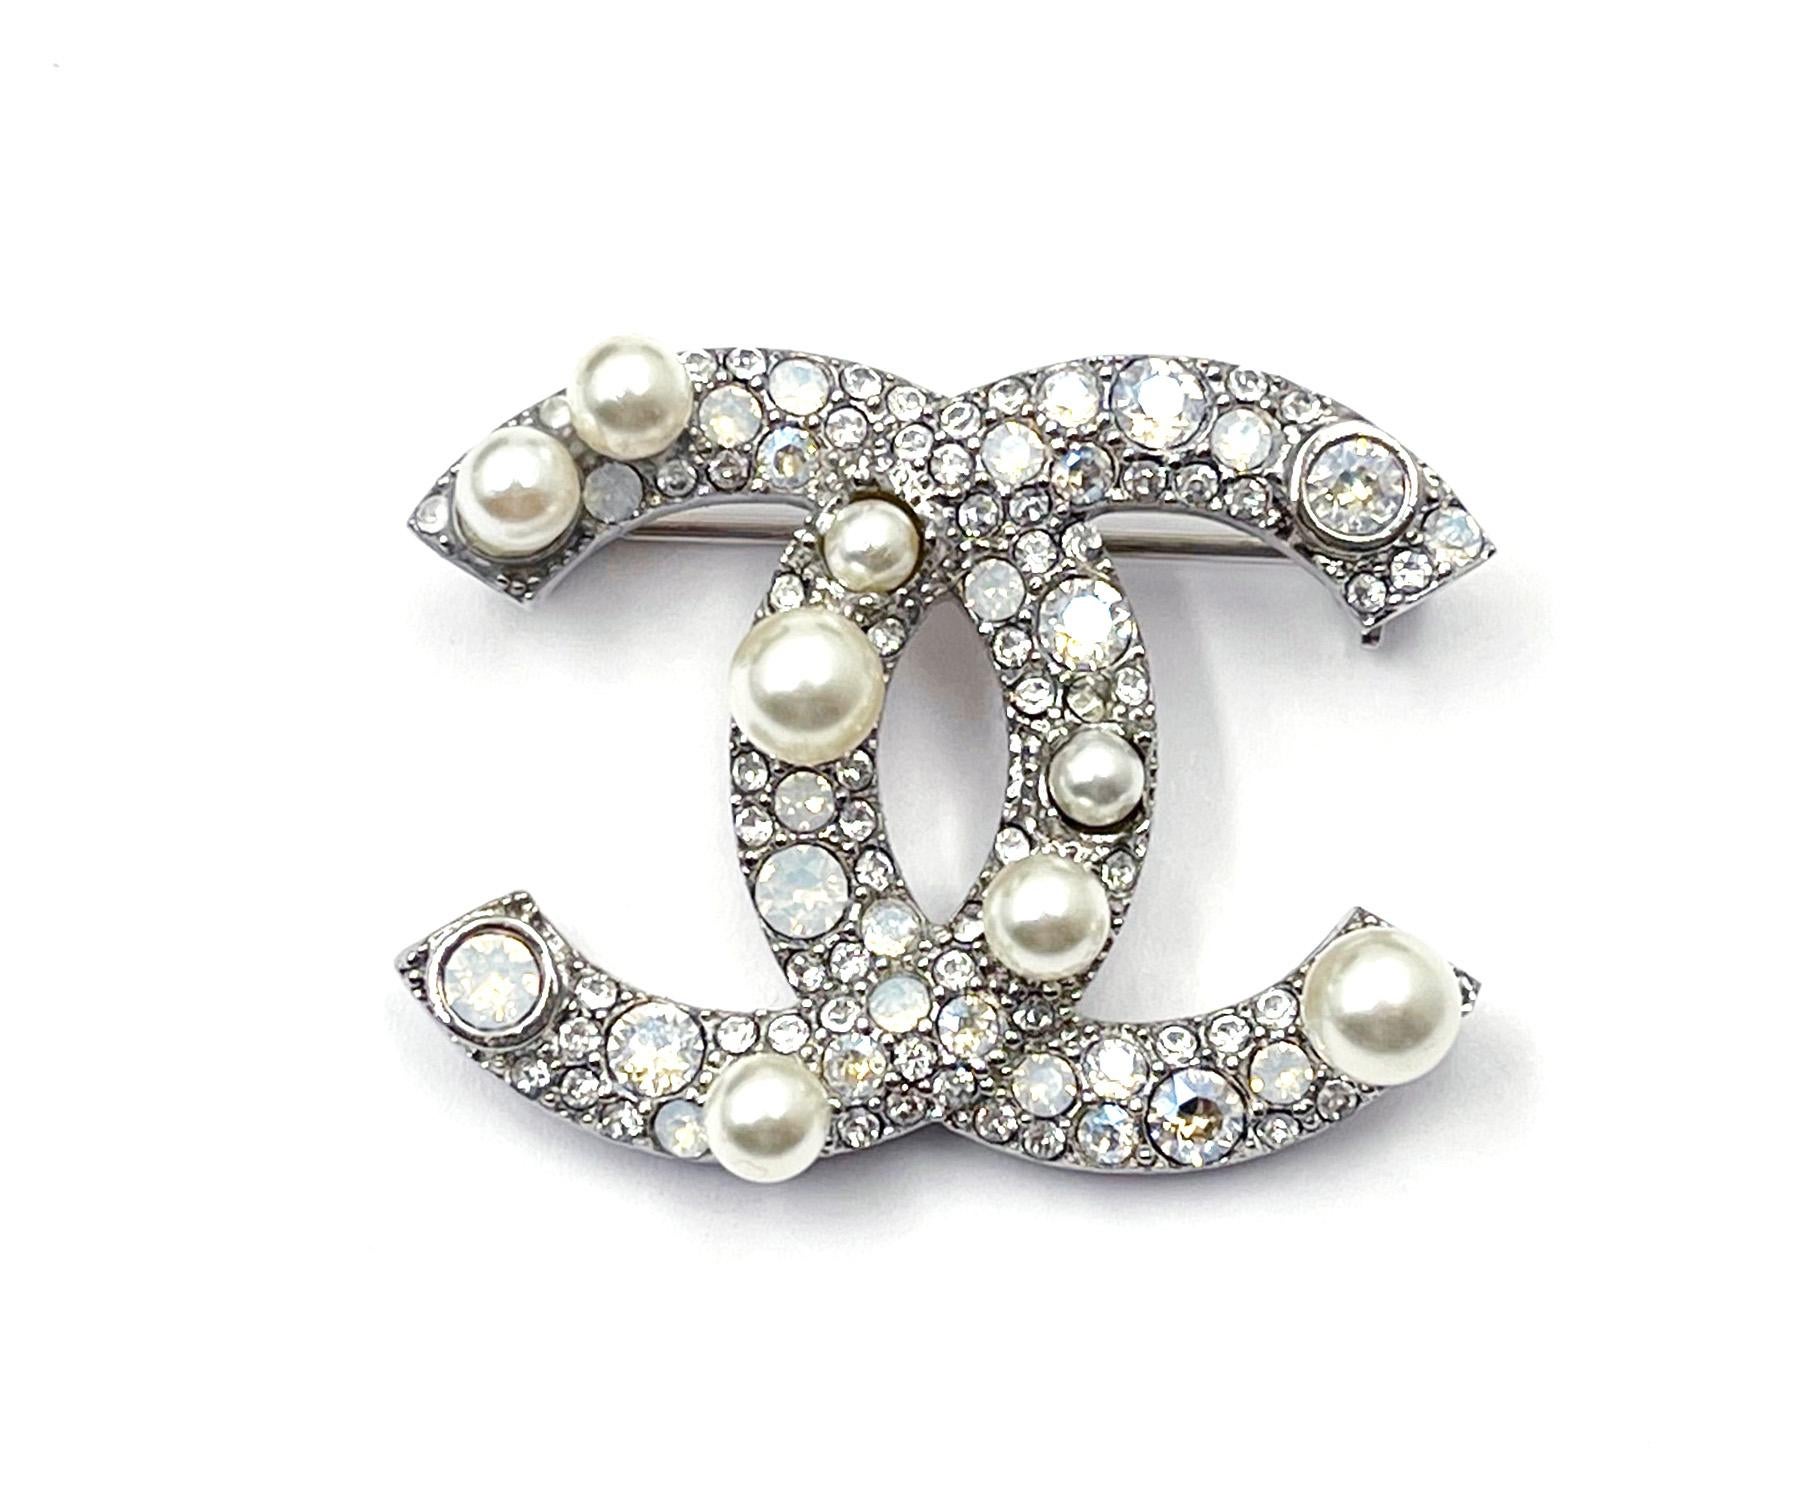 Chanel Silver CC Opal Crystal Freshwater Pearl Small Brooch

*Marked 17
*Made in Italy
*Comes with the original box and pouch

-It is approximately 1.